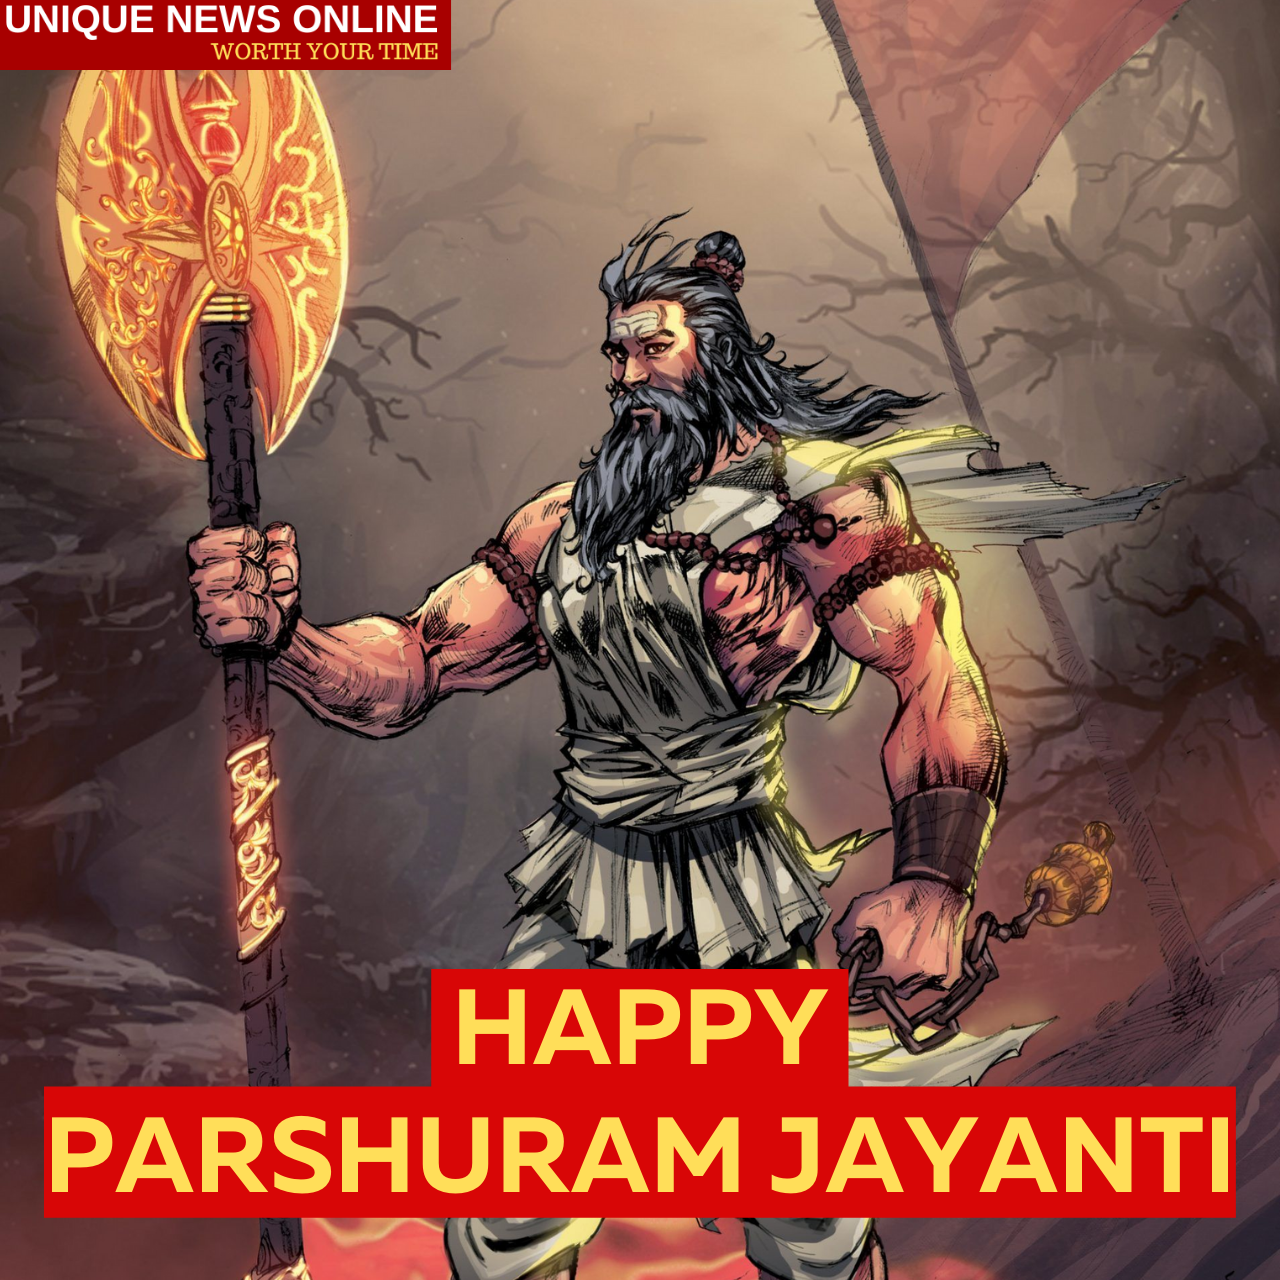 Happy Parshuram Jayanti 2021 Wishes, Images, Banner, Wallpaper, WhatsApp Status, Greetings, Quotes, and SMS to share